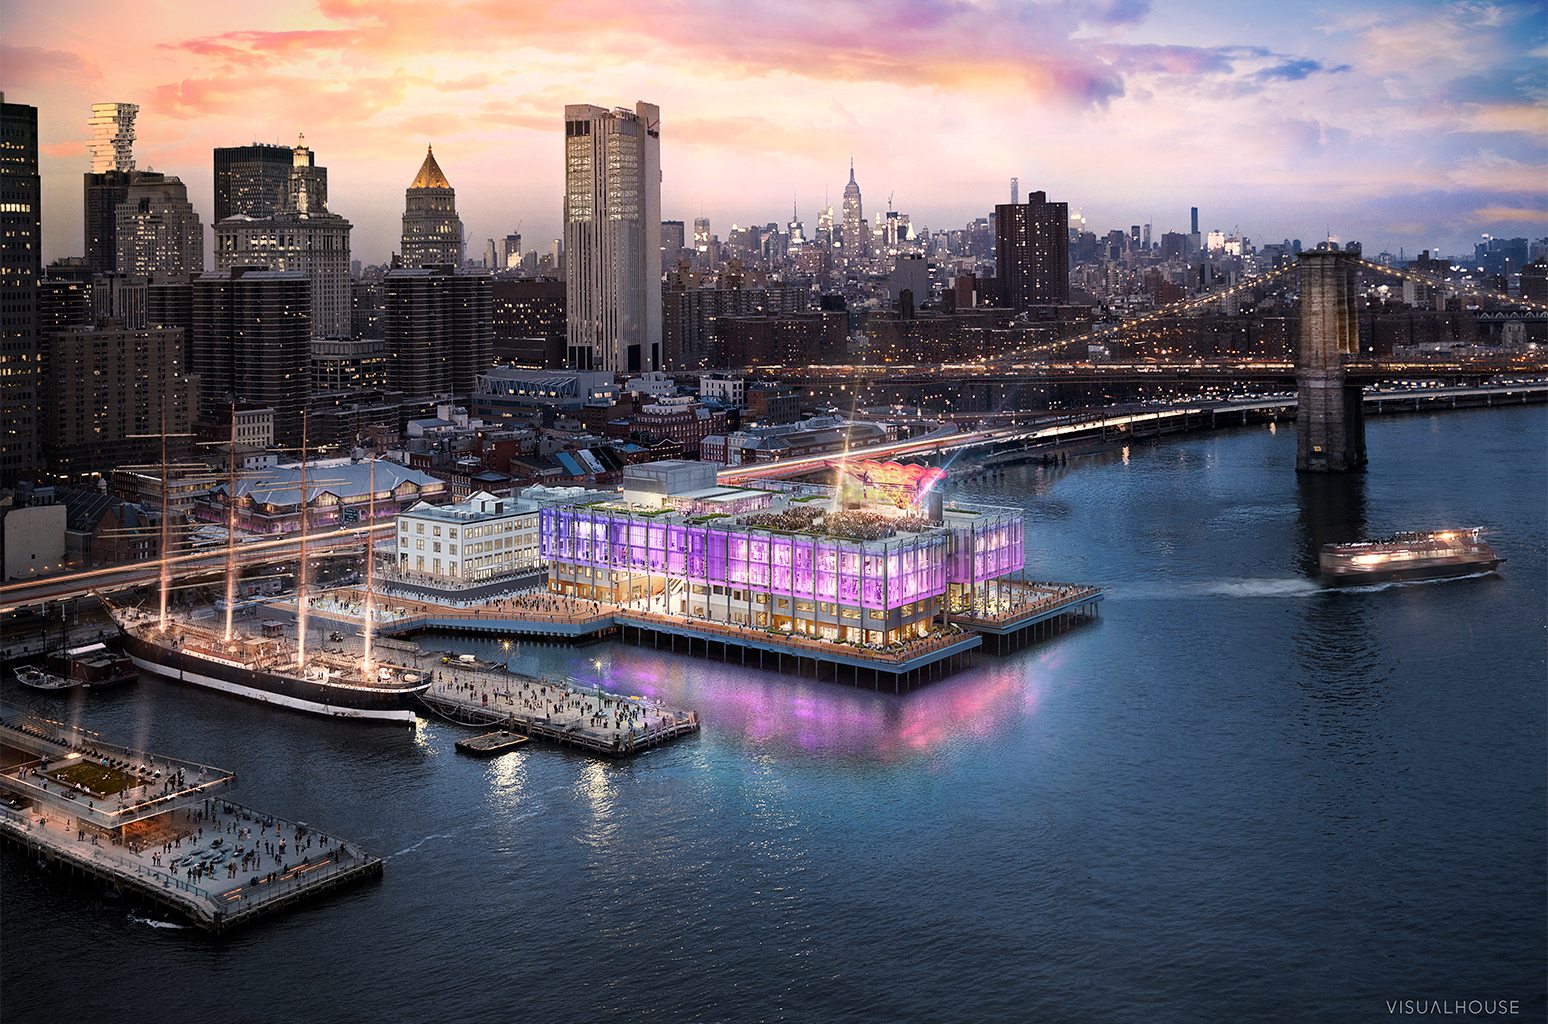 NYC's New Rooftop Venue 'Pier 17' Announces Live Nation As Exclusive